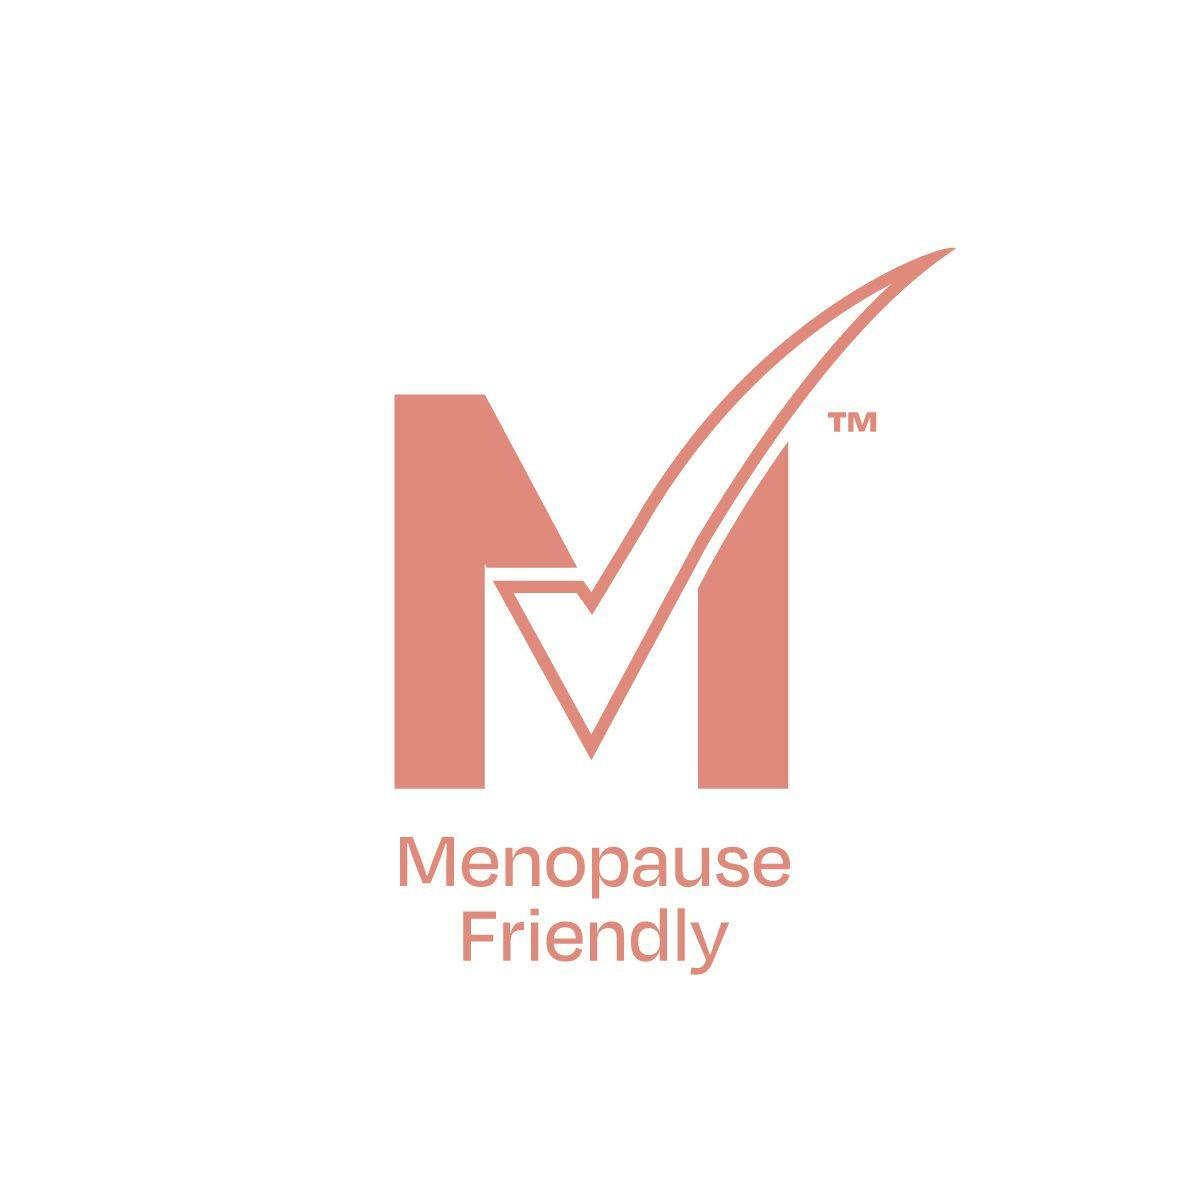 GenM's M-tick symbol now appears on product packaging to help women identify menopause-friendly products at retail.